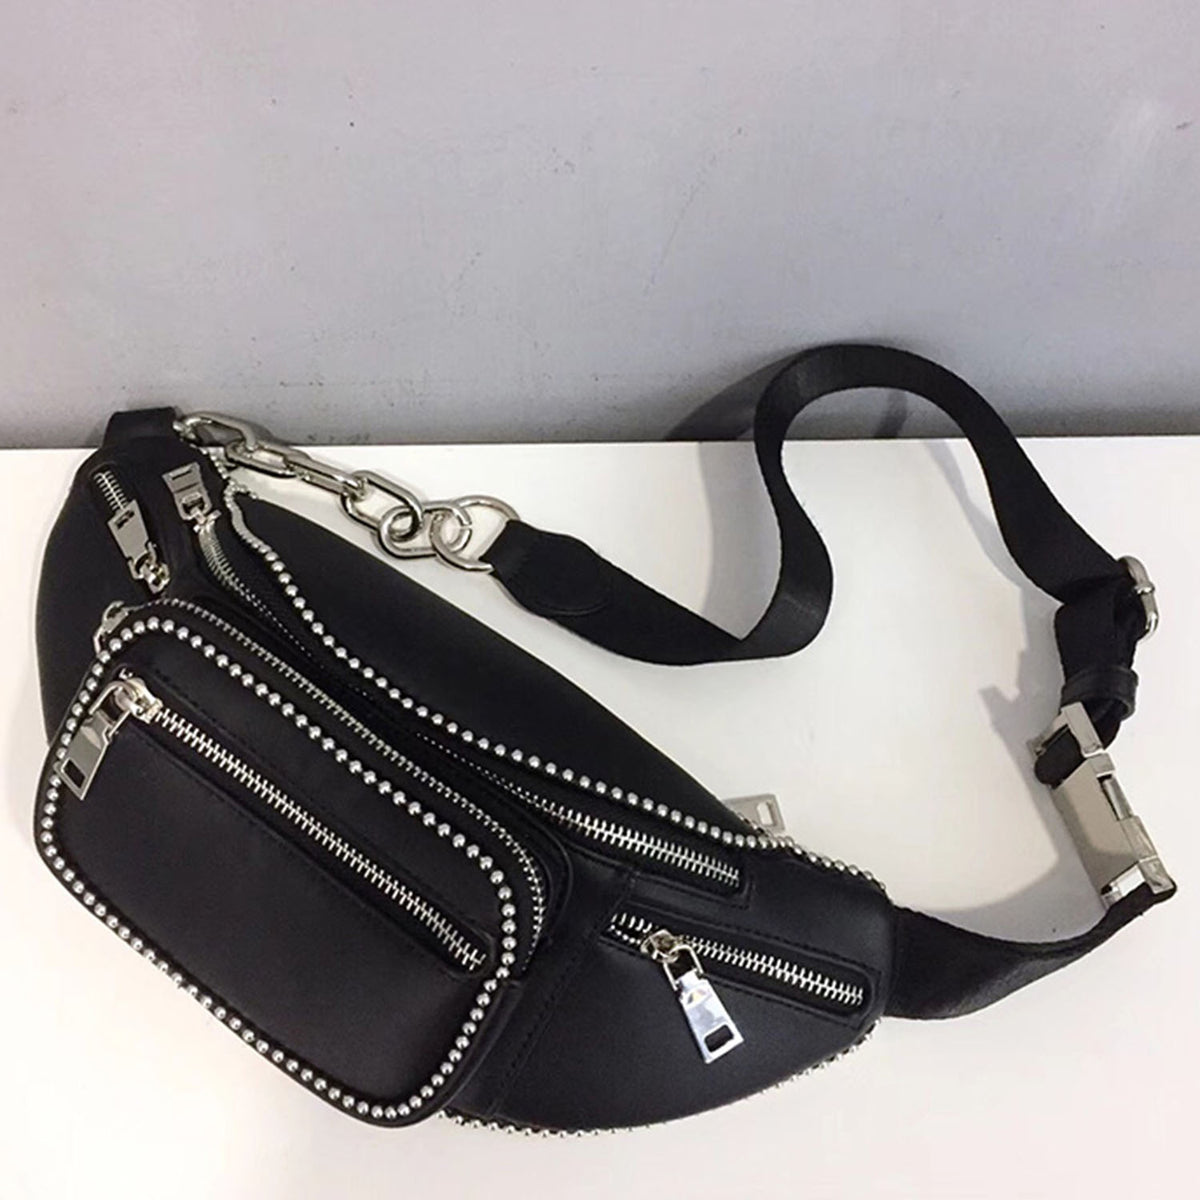 Faux Leather Fanny Pack - worthtryit.com